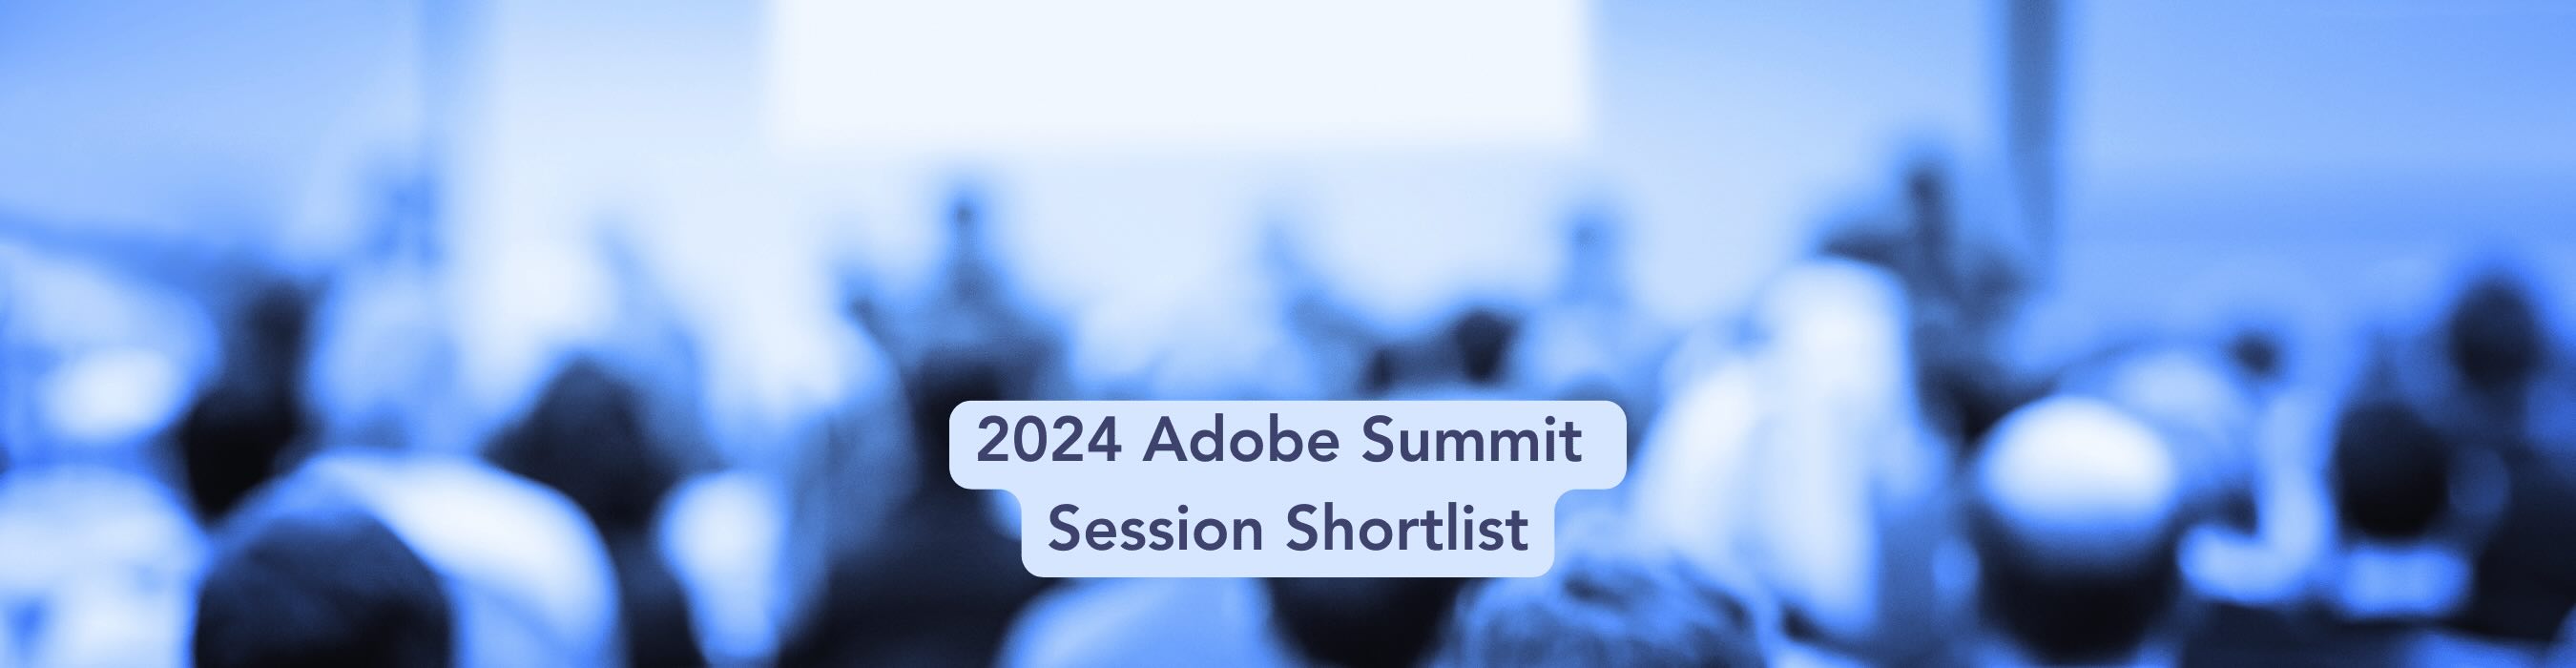 conference attendees in shadow with the text 2024 Adobe Summit Session Shortlist overlaid